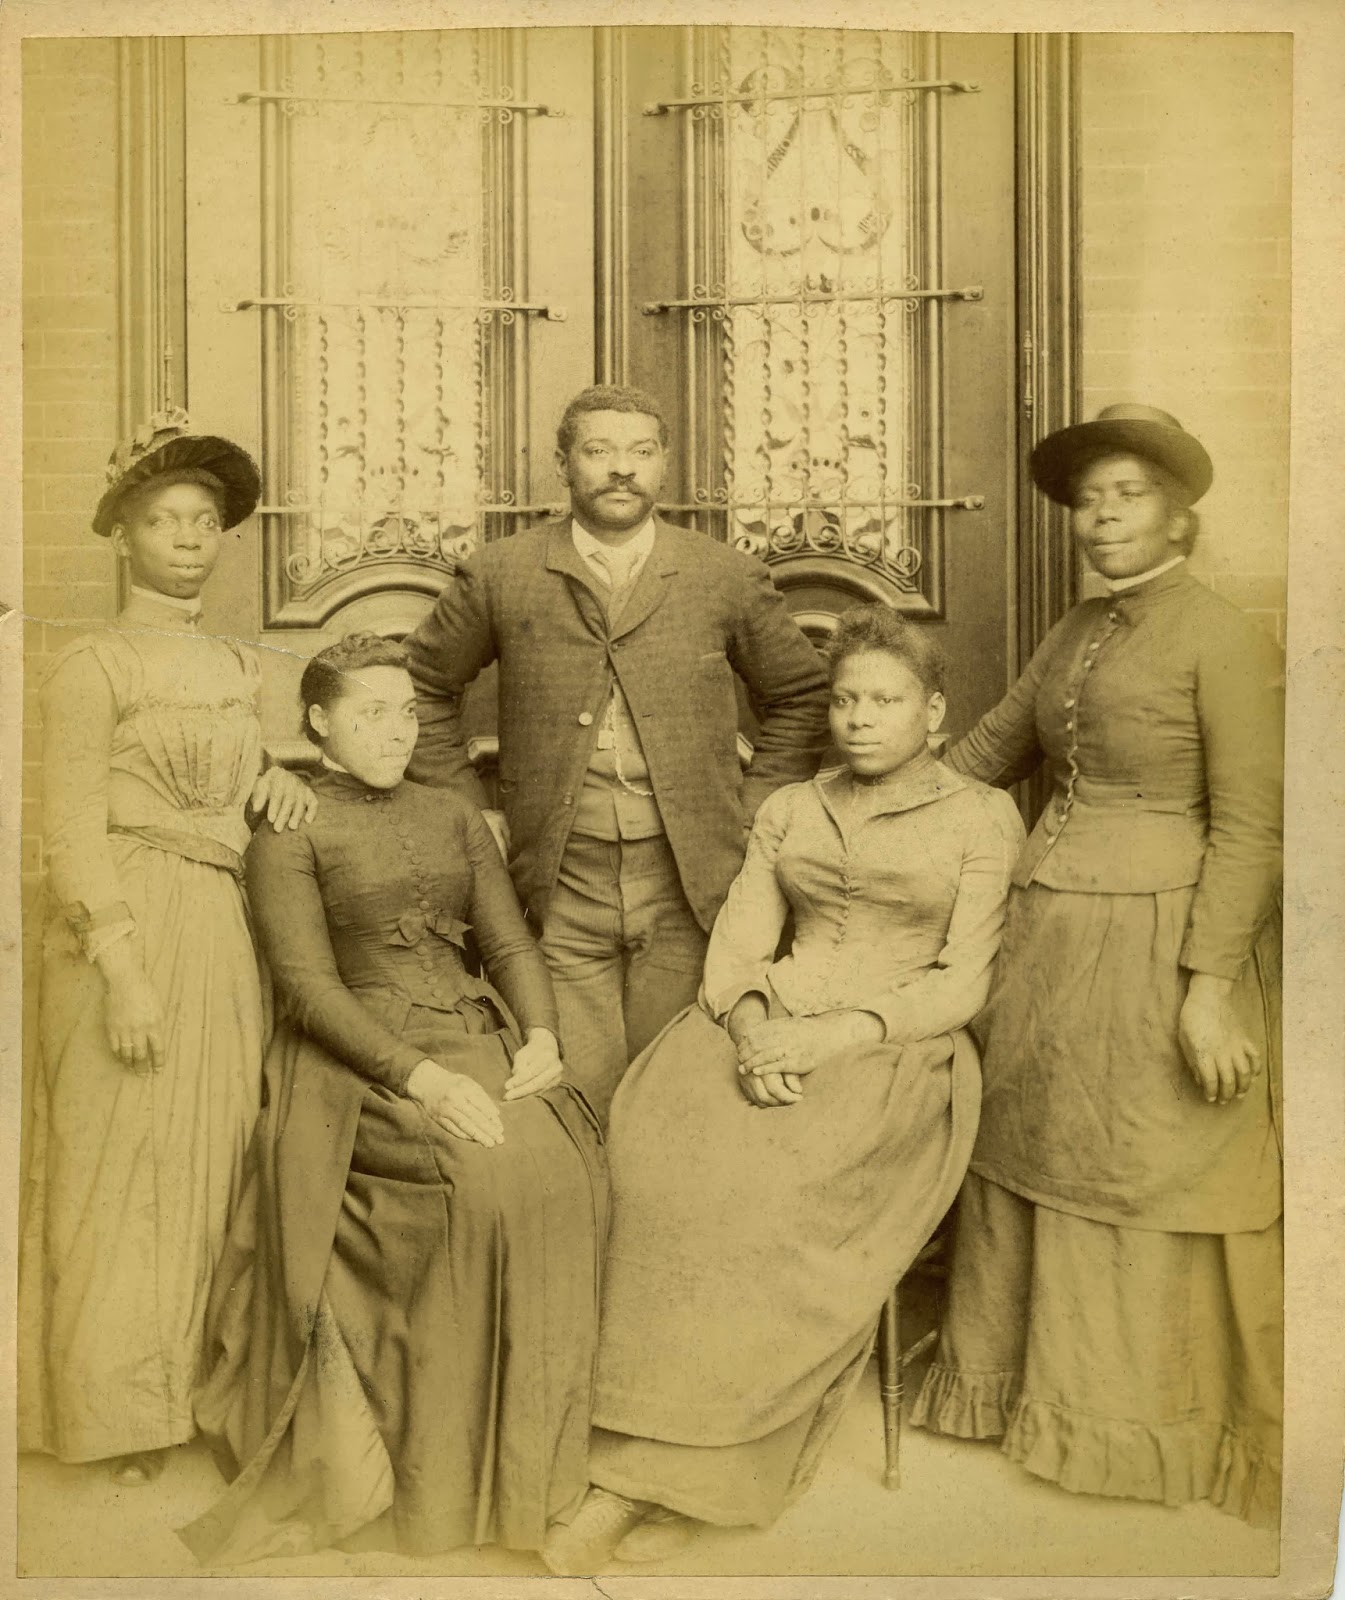 Formal portrait of four black women and one man, all dressed in fine clothing.